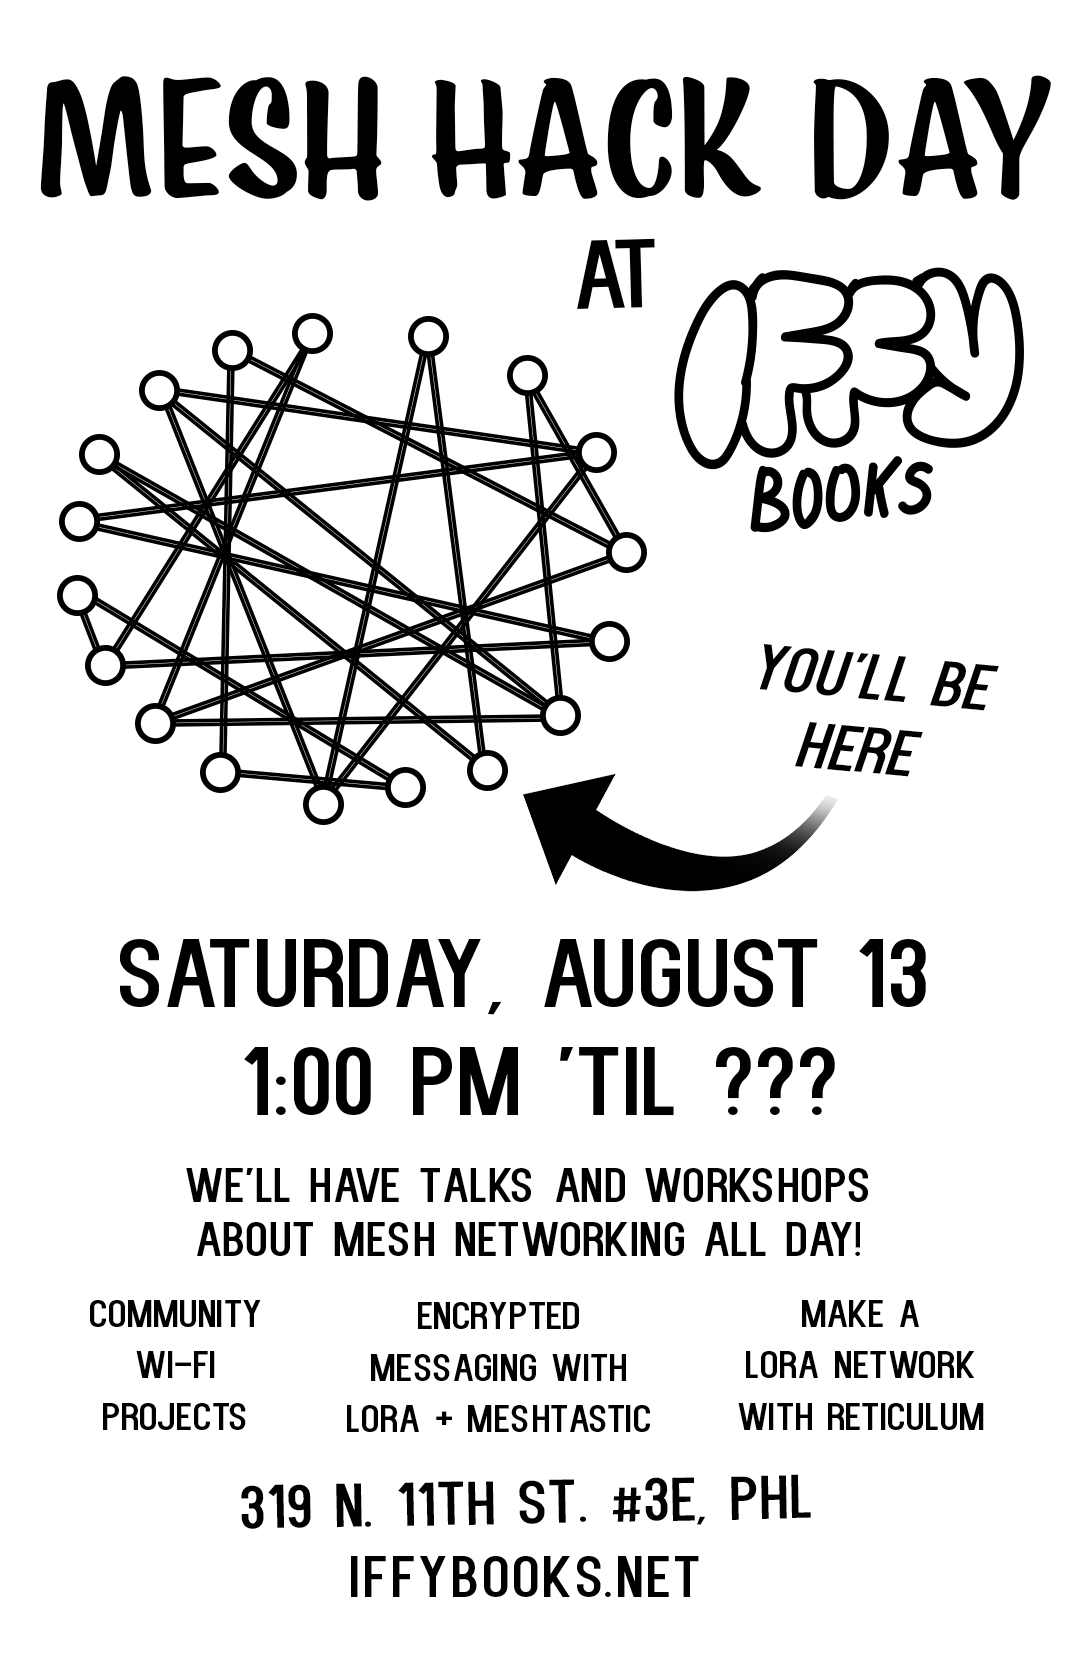 A flyer with black text on a white background: "MESH HACK DAY at Iffy Books / SATURDAY, AUGUST 13 / 1:00 PM 'TIL ??? / We'll have talks and workshops about mesh networking all day! / Community wi-fi projects / Encrypted messaging with LoRa + Meshtastic / Make a LoRa network with Reticulum / 319 N. 11th St. #3E, PHL / IFFYBOOKS.NET" In the middle of the flyer is a network diagram with 18 nodes connected by lines. An arrow is pointing to one of the nodes, with the text "YOU'LL BE HERE"